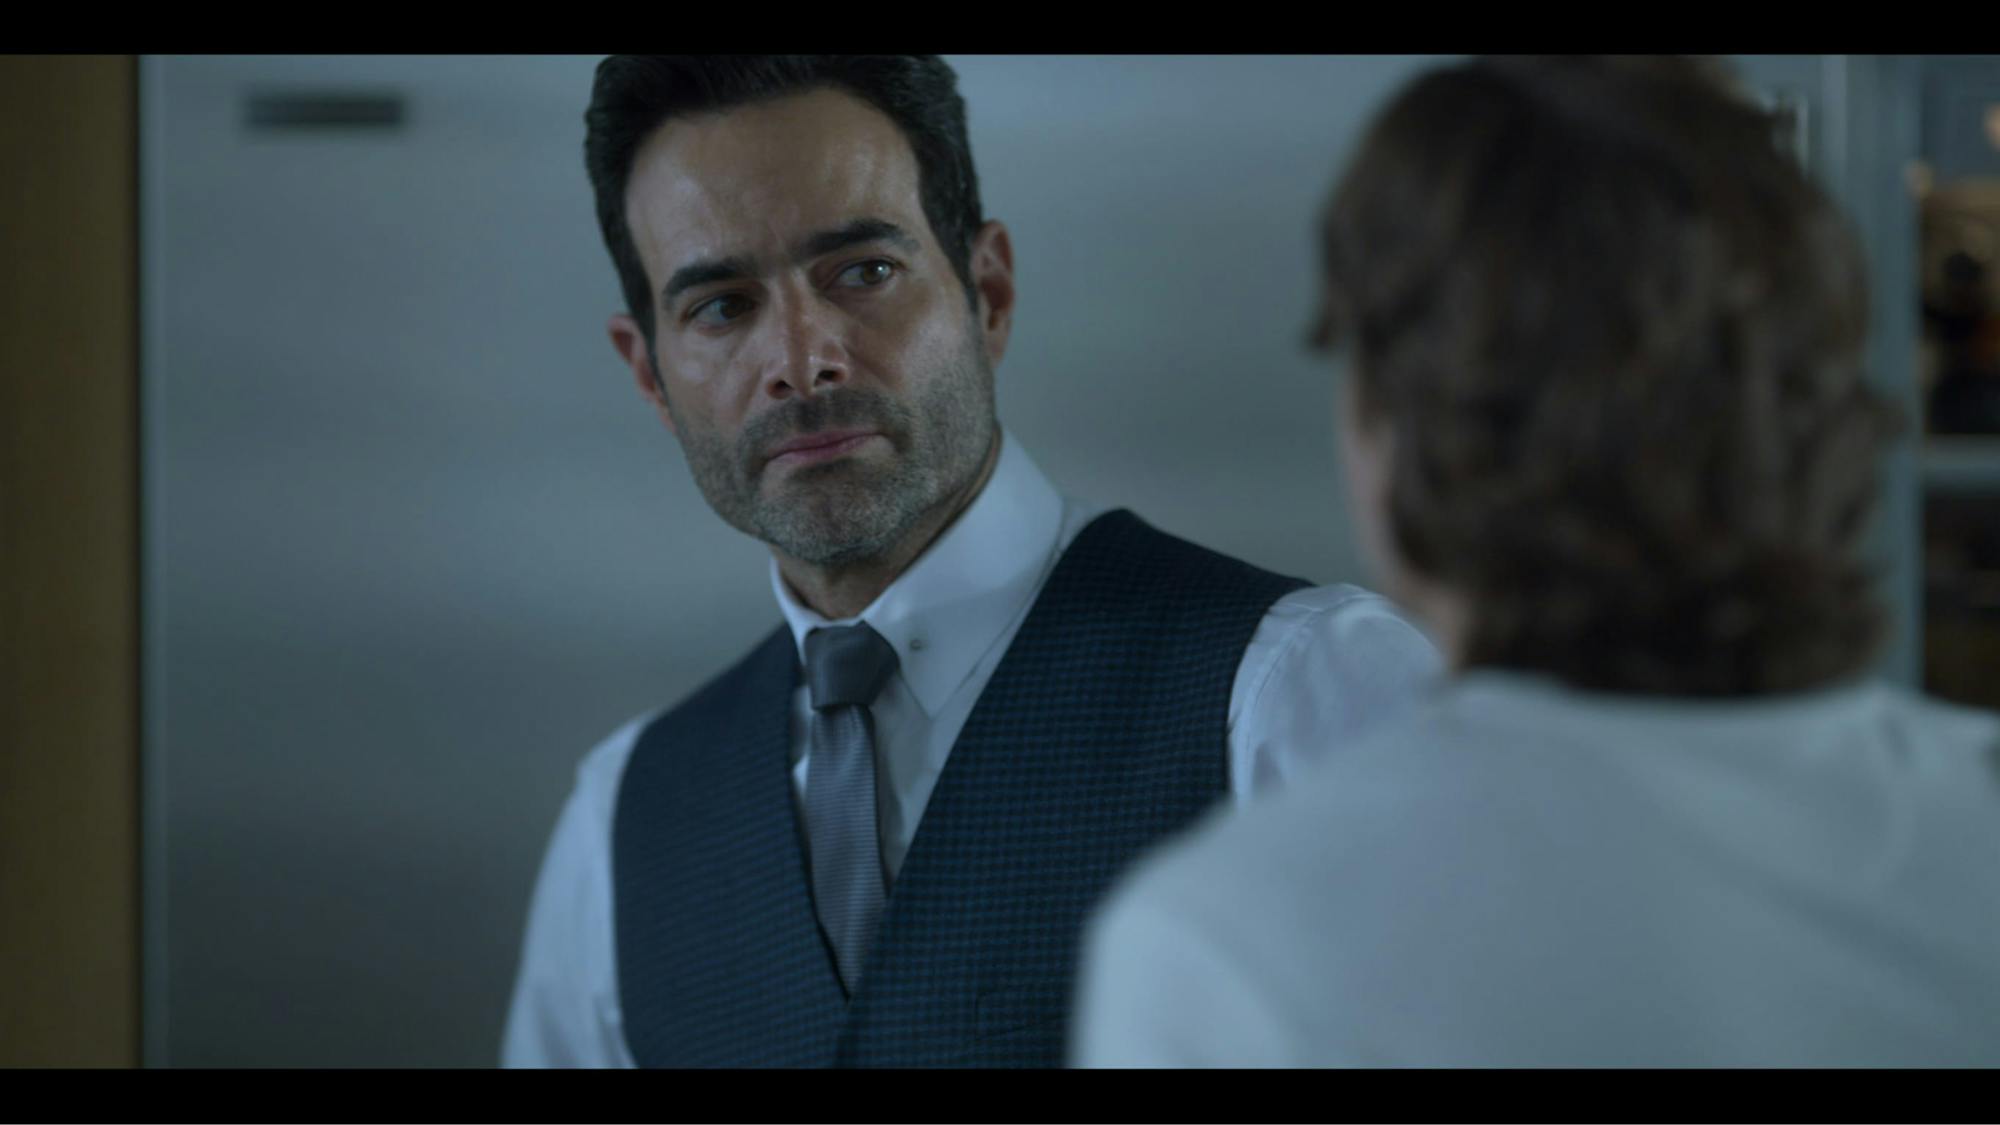 Lorenzo (Luis Roberto Guzmán) wears a white shirt, grey tie, and navy vest. He looks scared as he faces a man in the foreground of this shot.